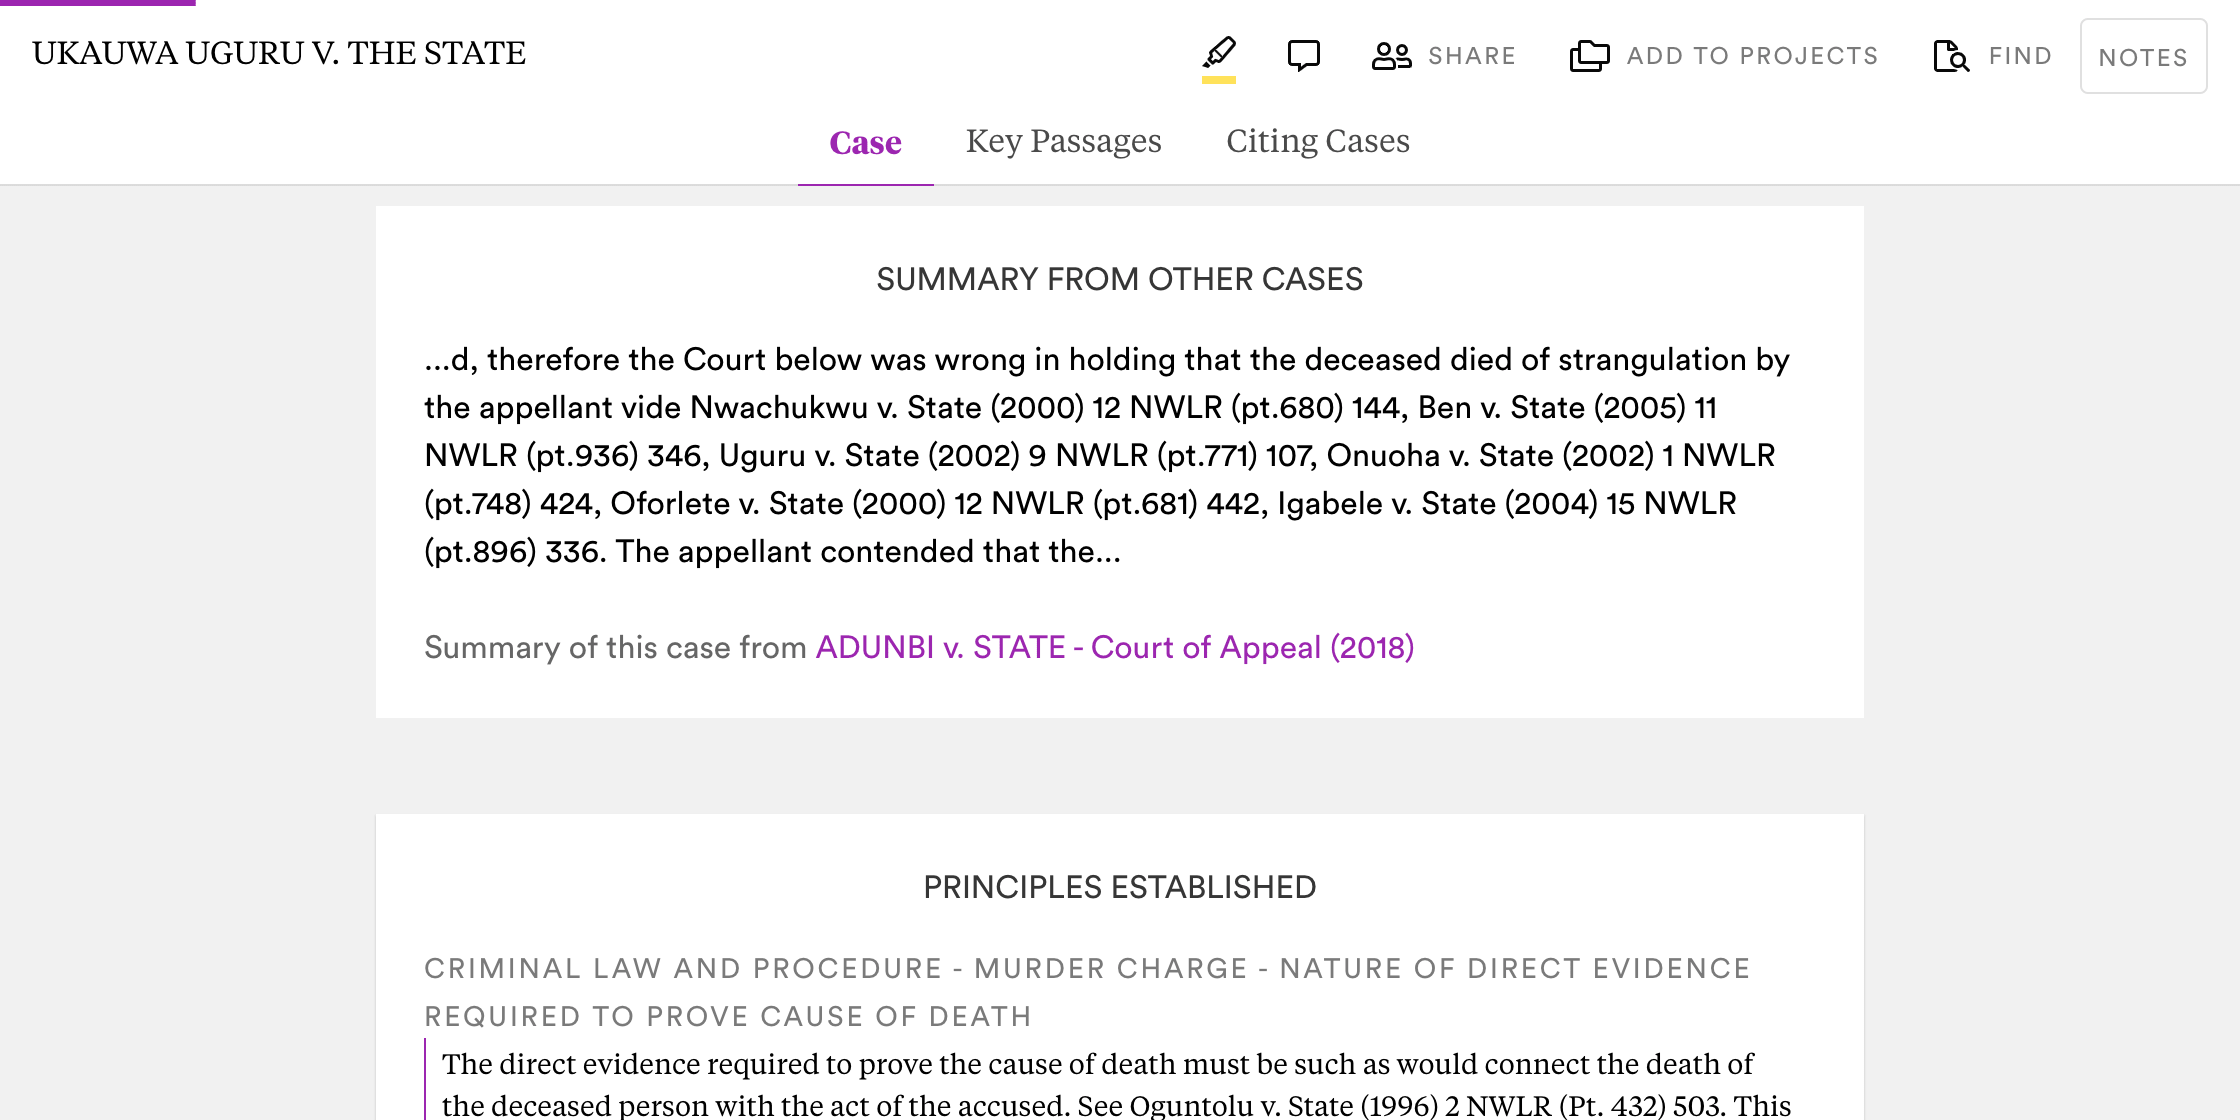 Summary from other cases